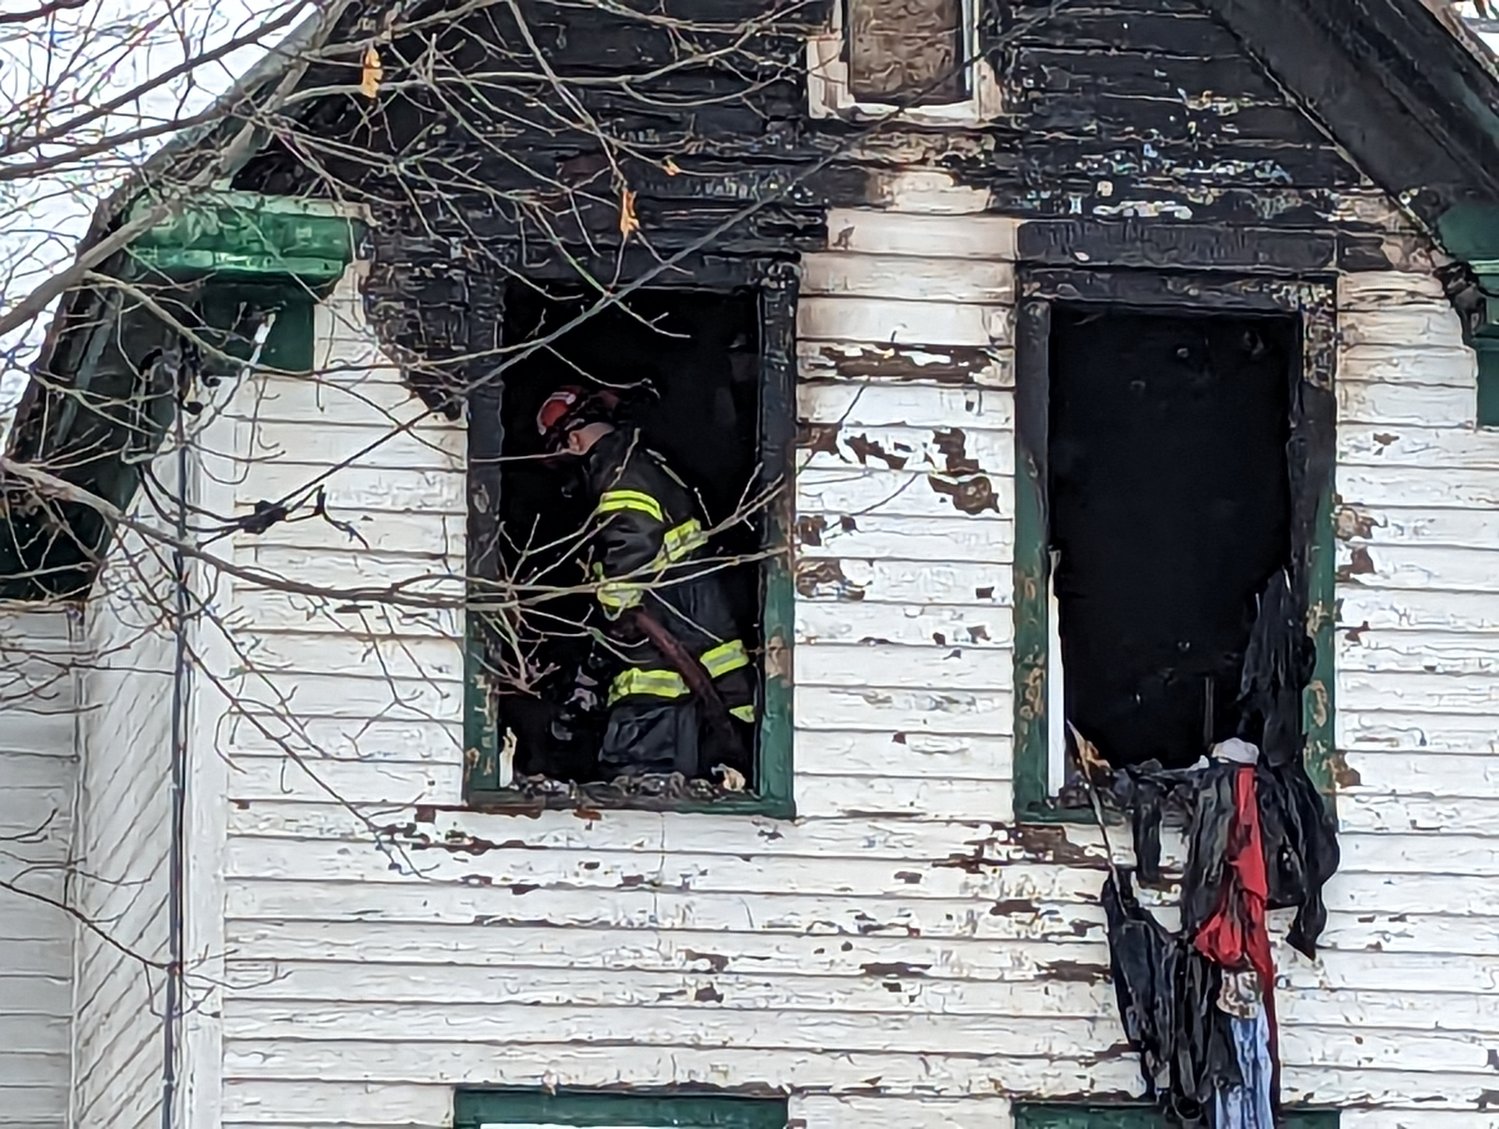 A Rome firefighter douses hot spots on the second floor of 206 S. Doxtator Ave. in Rome on Saturday. Fire officials said two upstairs bedrooms were heavily damaged by the fire. The cause remains under investigation.